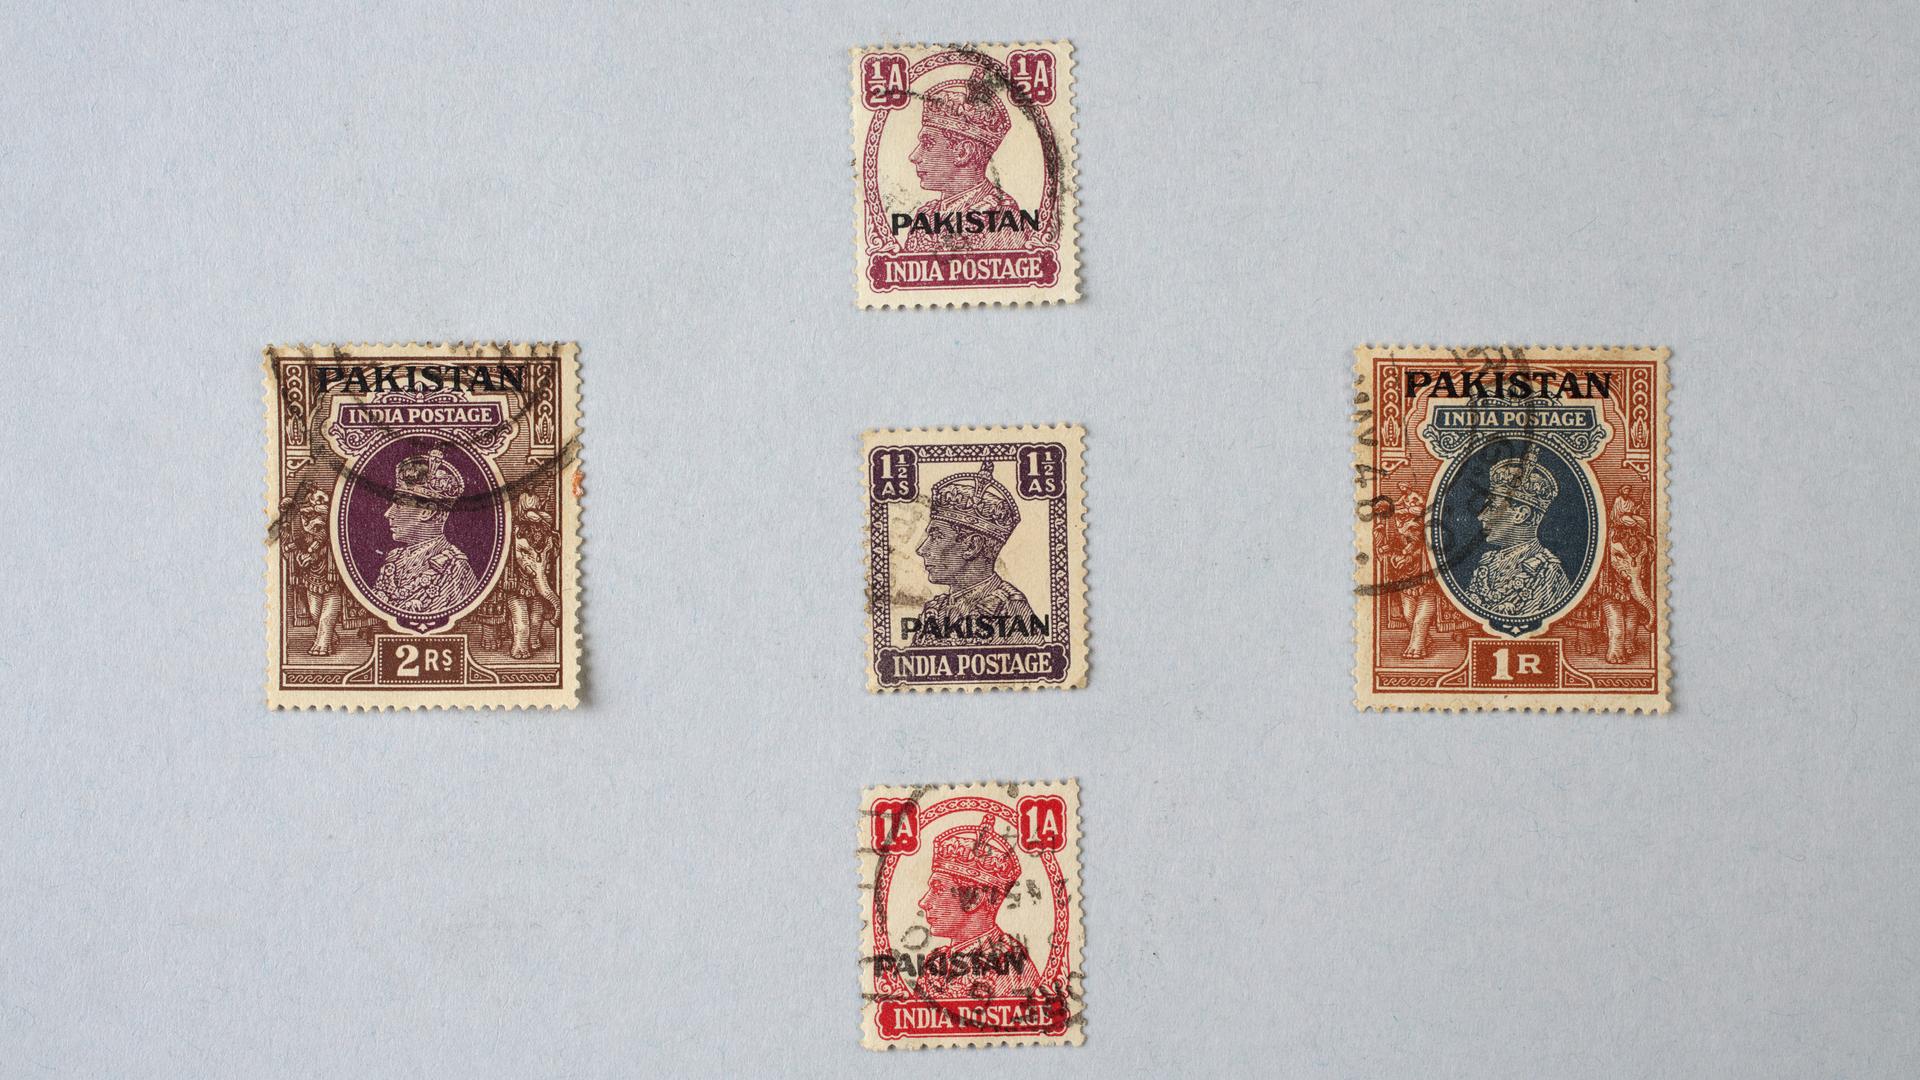 The newly created country of Pakistan continued to use stamps printed by the British, but stamped them with the name Pakistan, until new stamps could be printed.